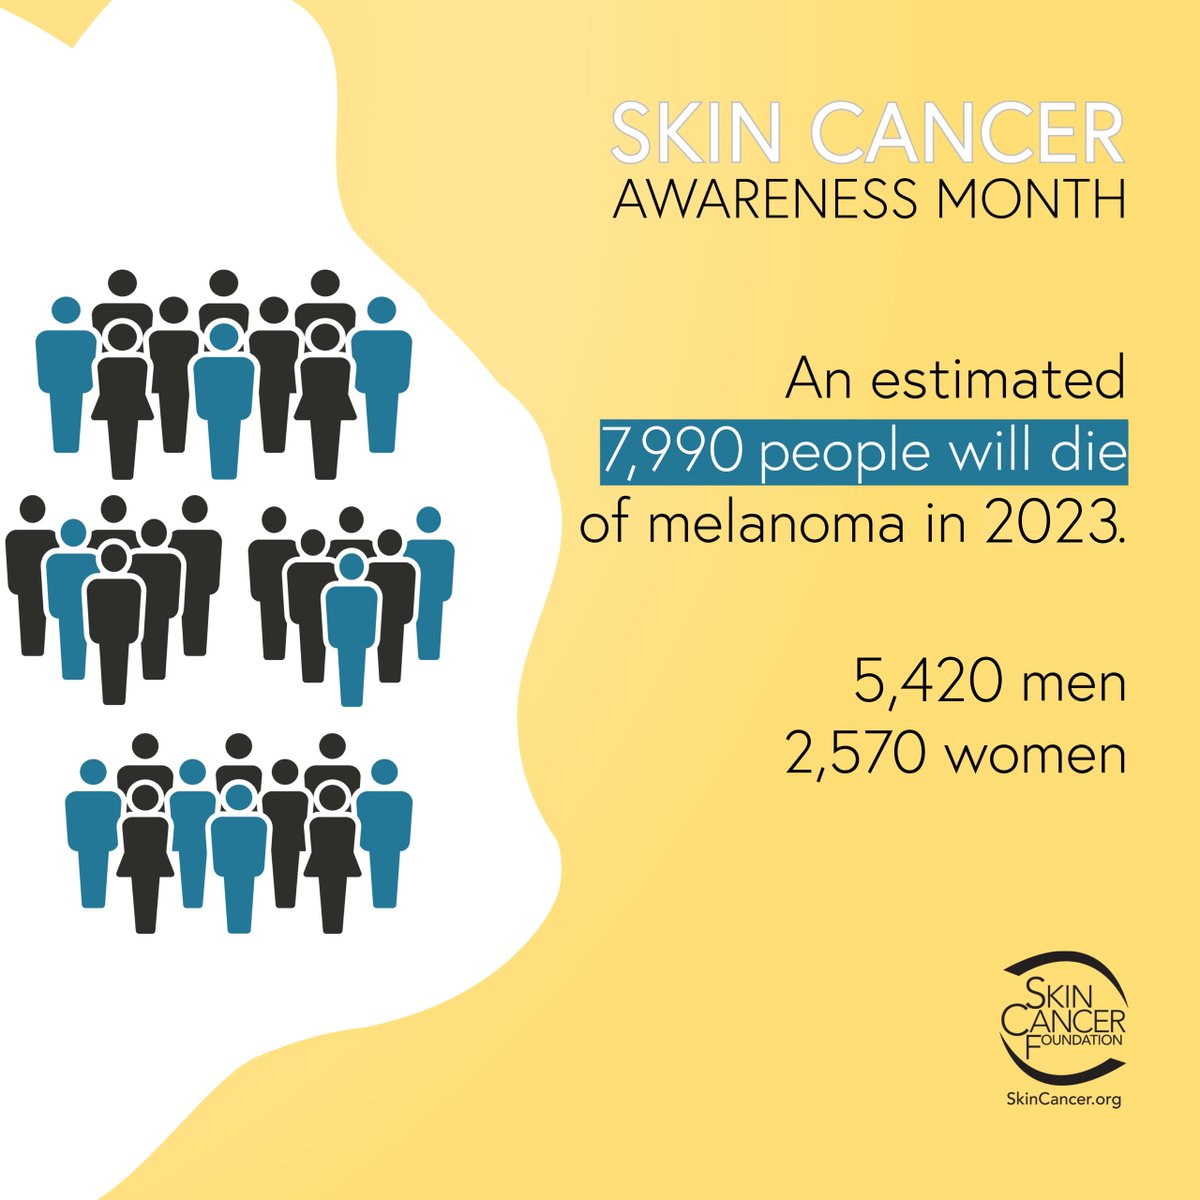 Let’s come together to educate people about the dangers of skin cancer. This month, we’re busting the myth that skin cancer is “no big deal.” It’s serious! Pass it on. @SkinCancerFoundation